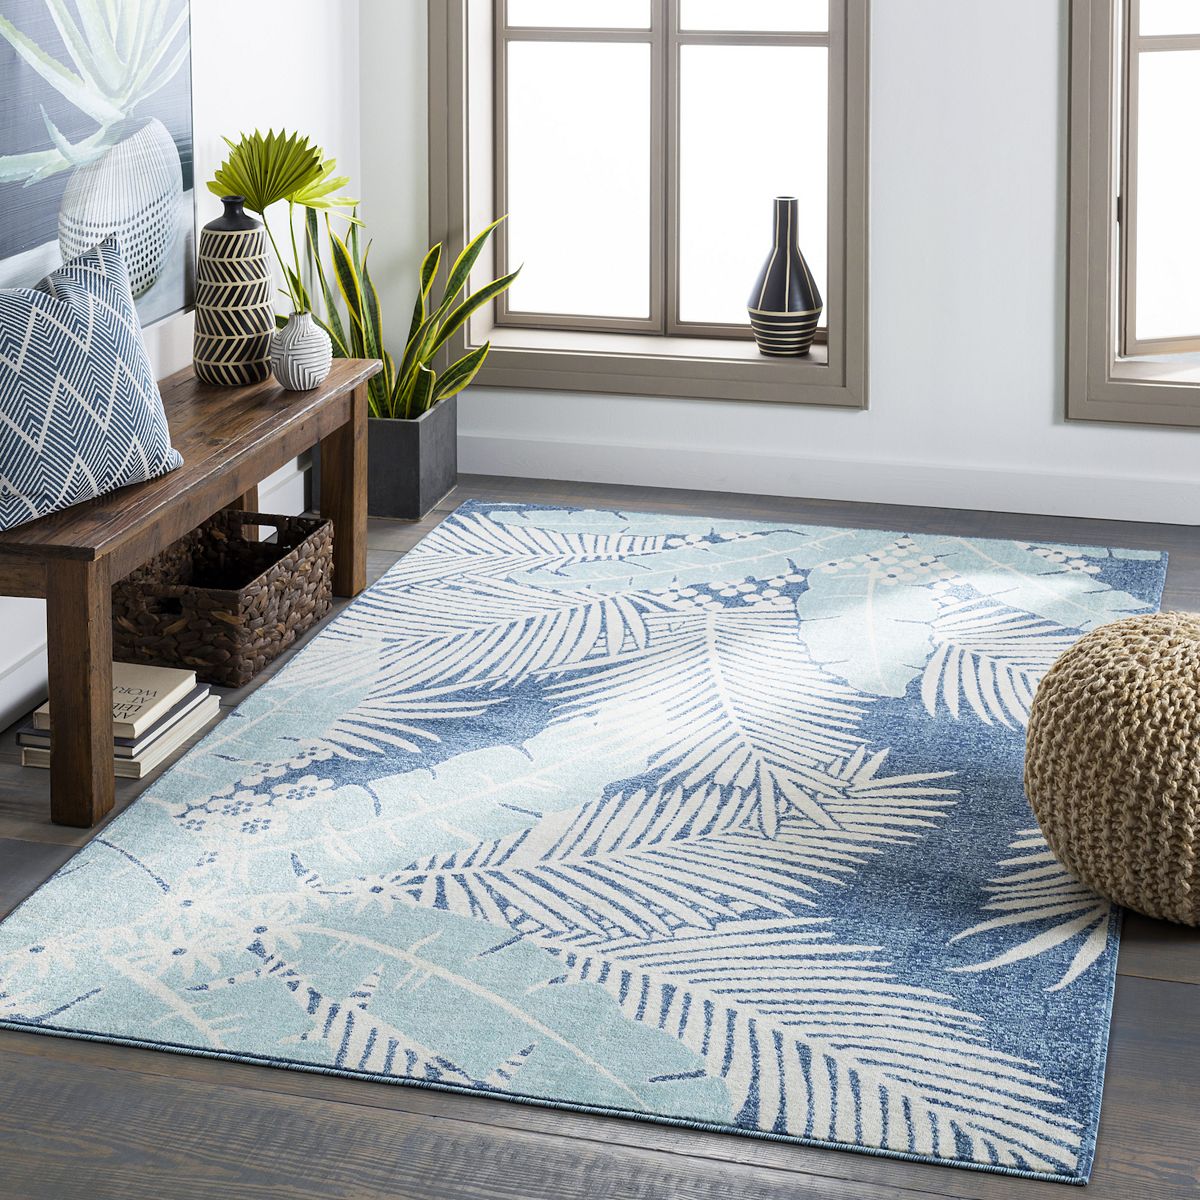 Coastal Rugs How To Pick The Best Area, Beach Themed Rugs